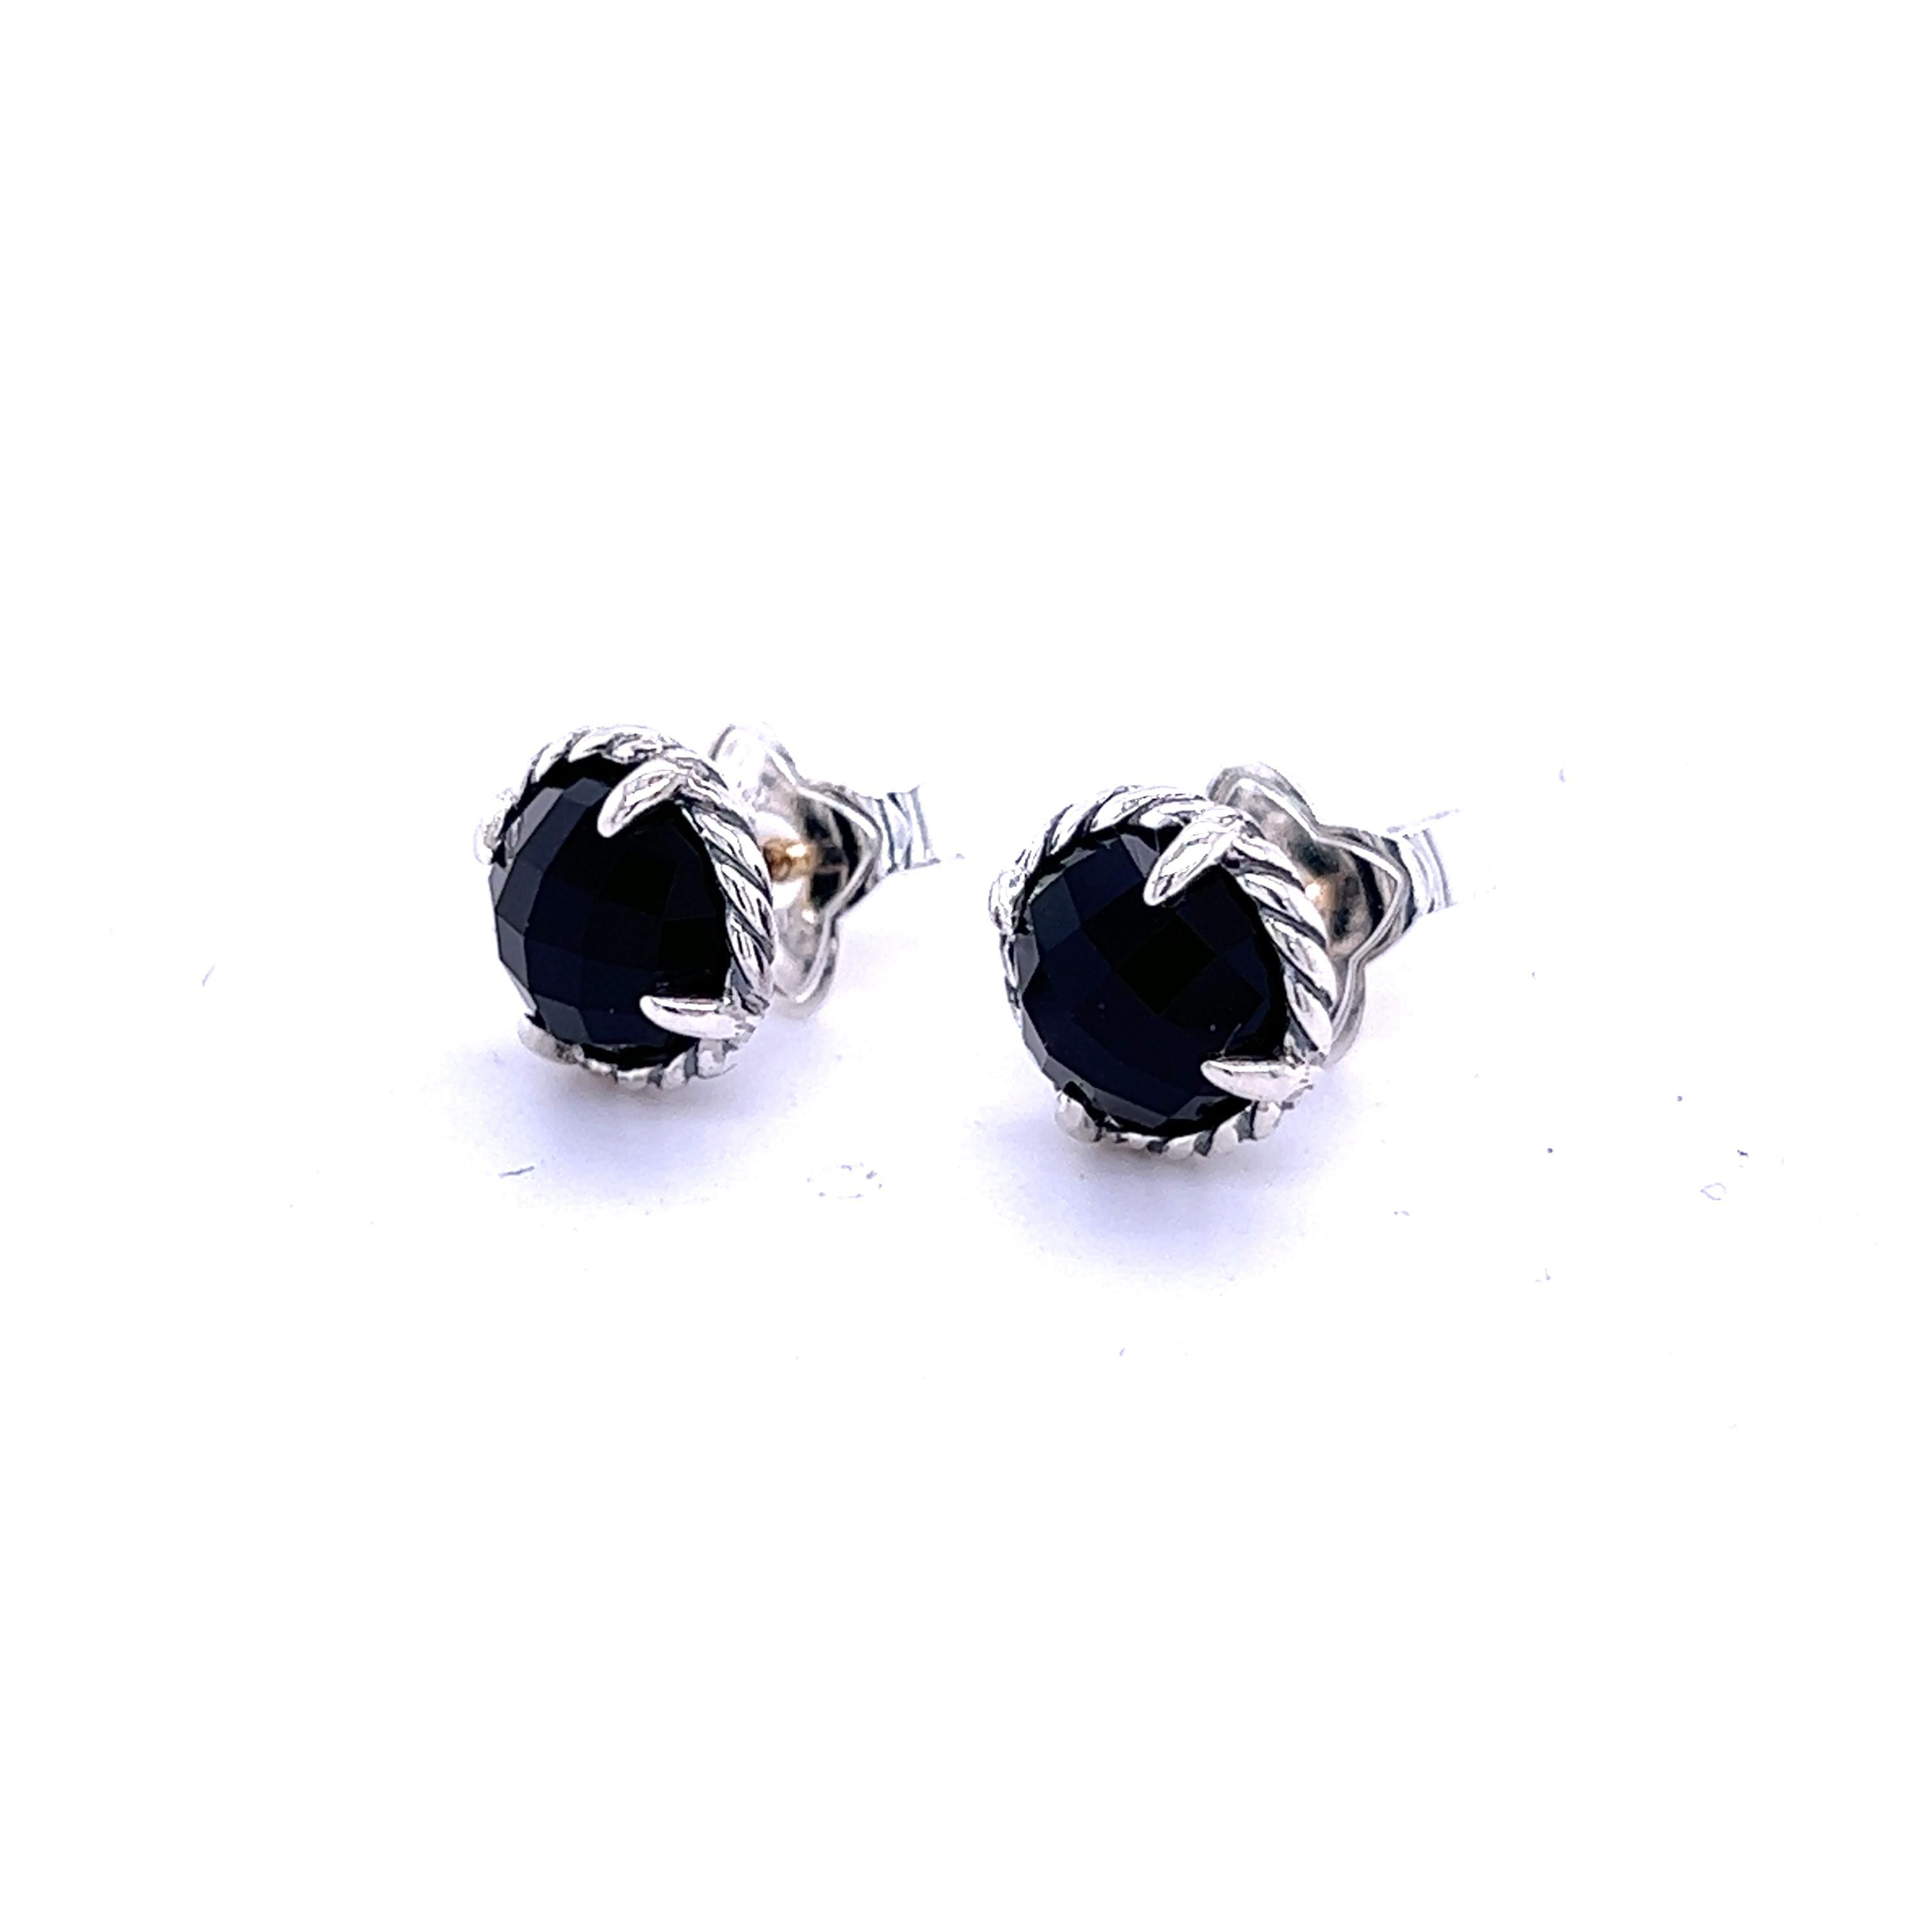 David Yurman Authentic Estate Black Onyx Chantelaine Stud Earrings Silver DY176

Retail: $475.00

TRUSTED SELLER SINCE 2002

PLEASE SEE OUR HUNDREDS OF POSITIVE FEEDBACKS FROM OUR CLIENTS!!

FREE SHIPPING

This elegant Authentic David Yurman Men's